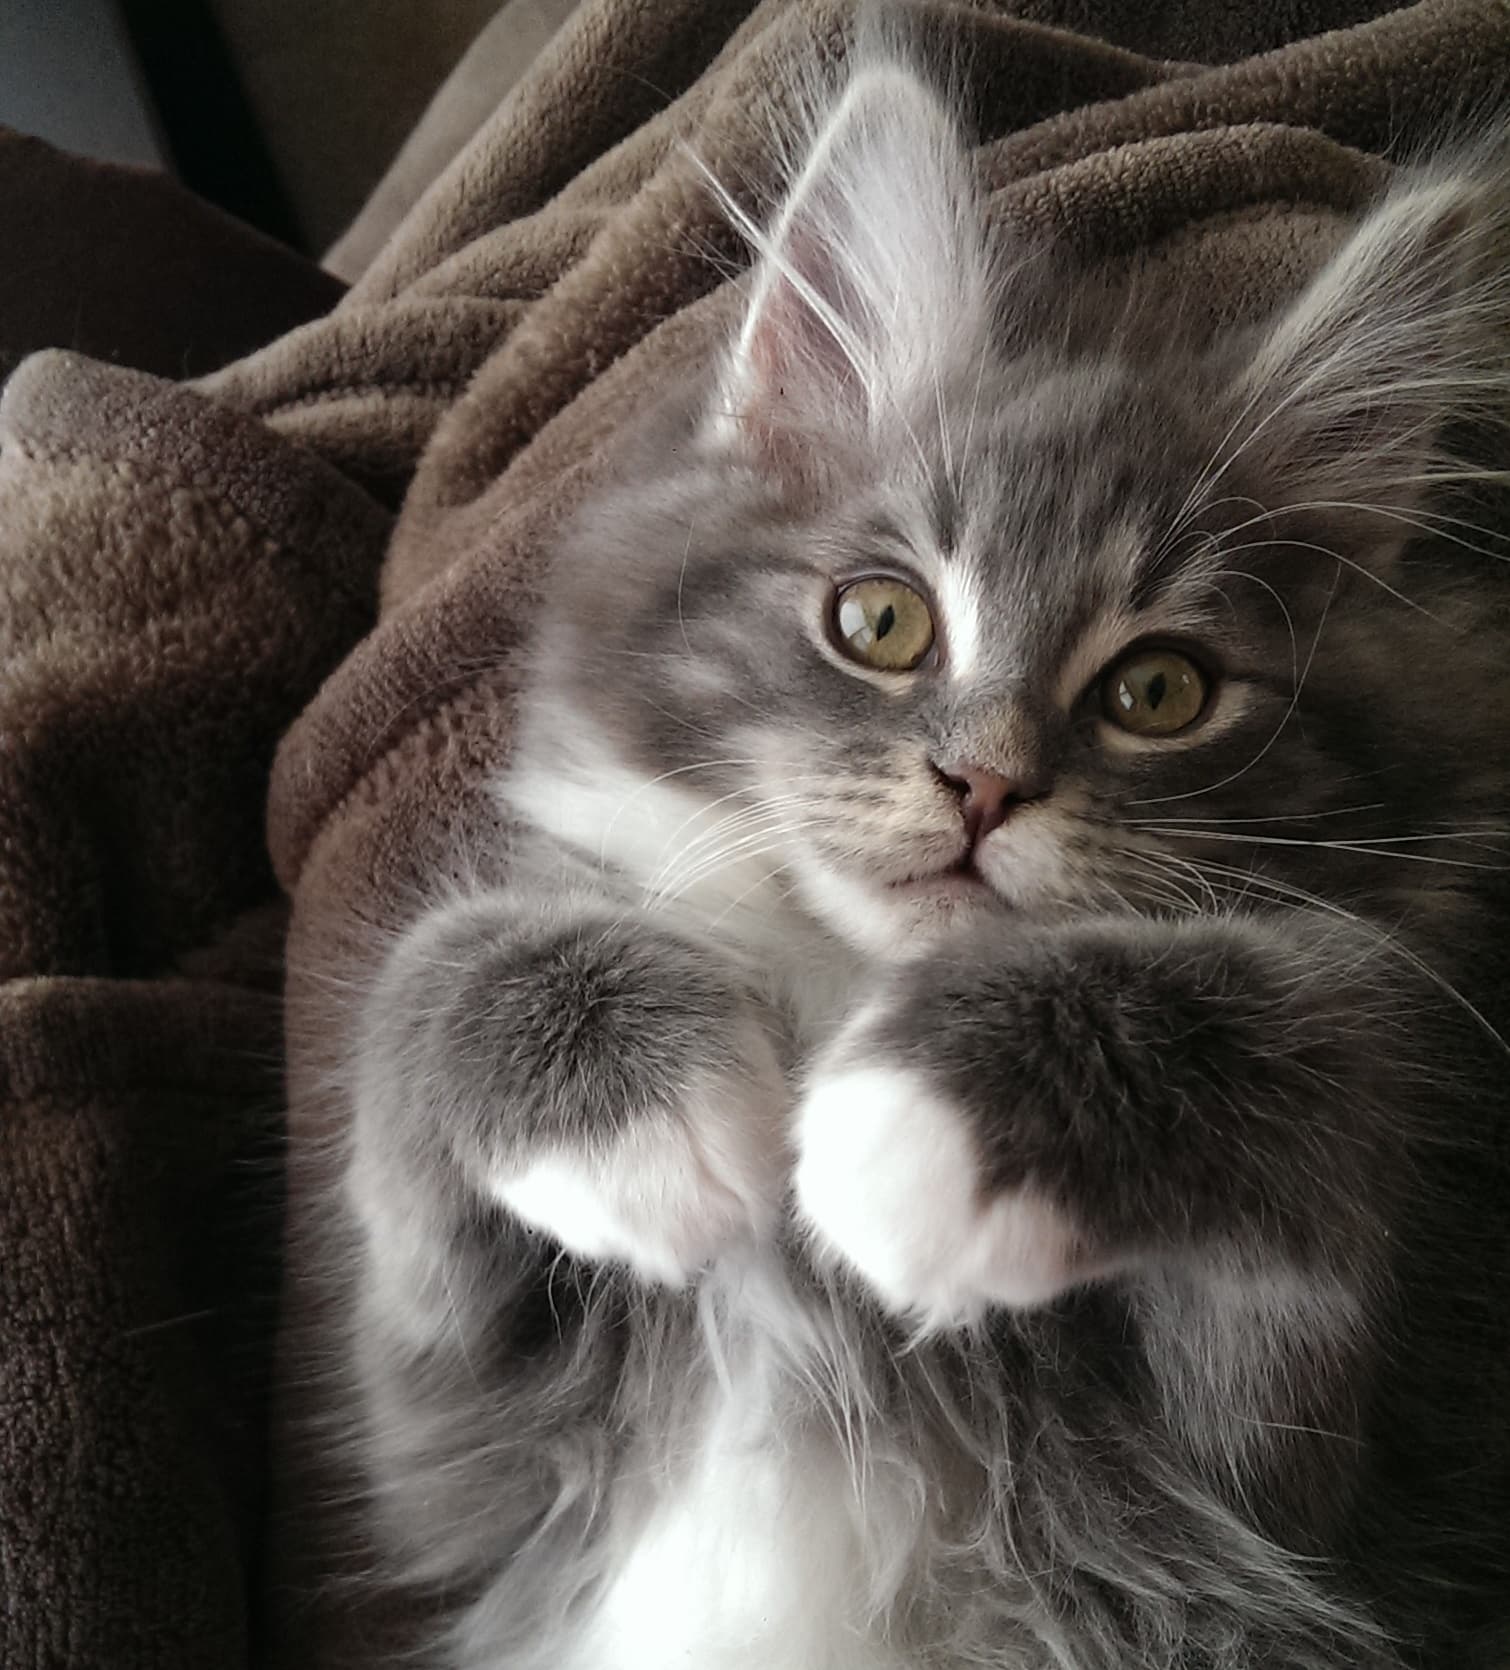 20 photos of beautiful Maine Coon cats that prove they are beyond majestic